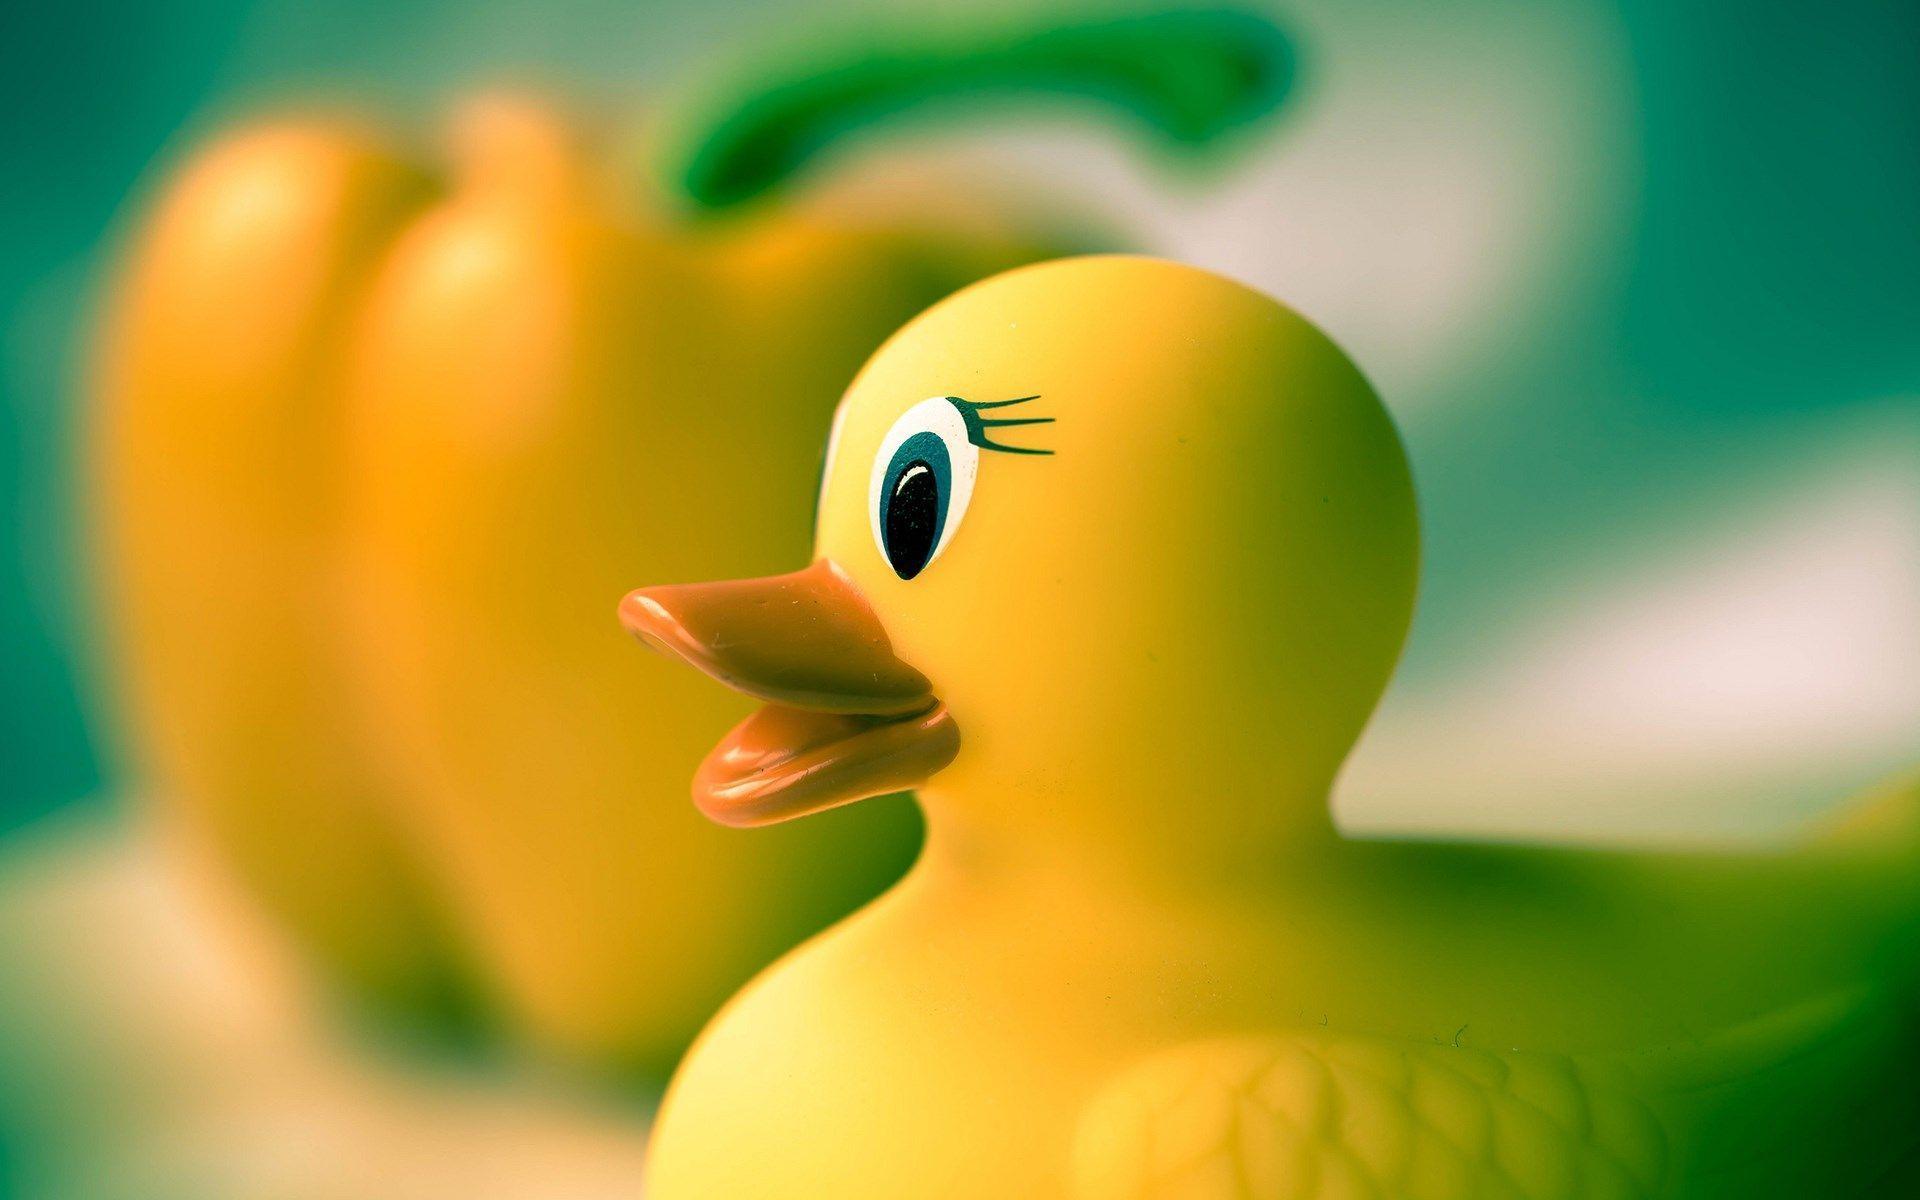 Wallpaper For > Colorful Rubber Duck Wallpaper